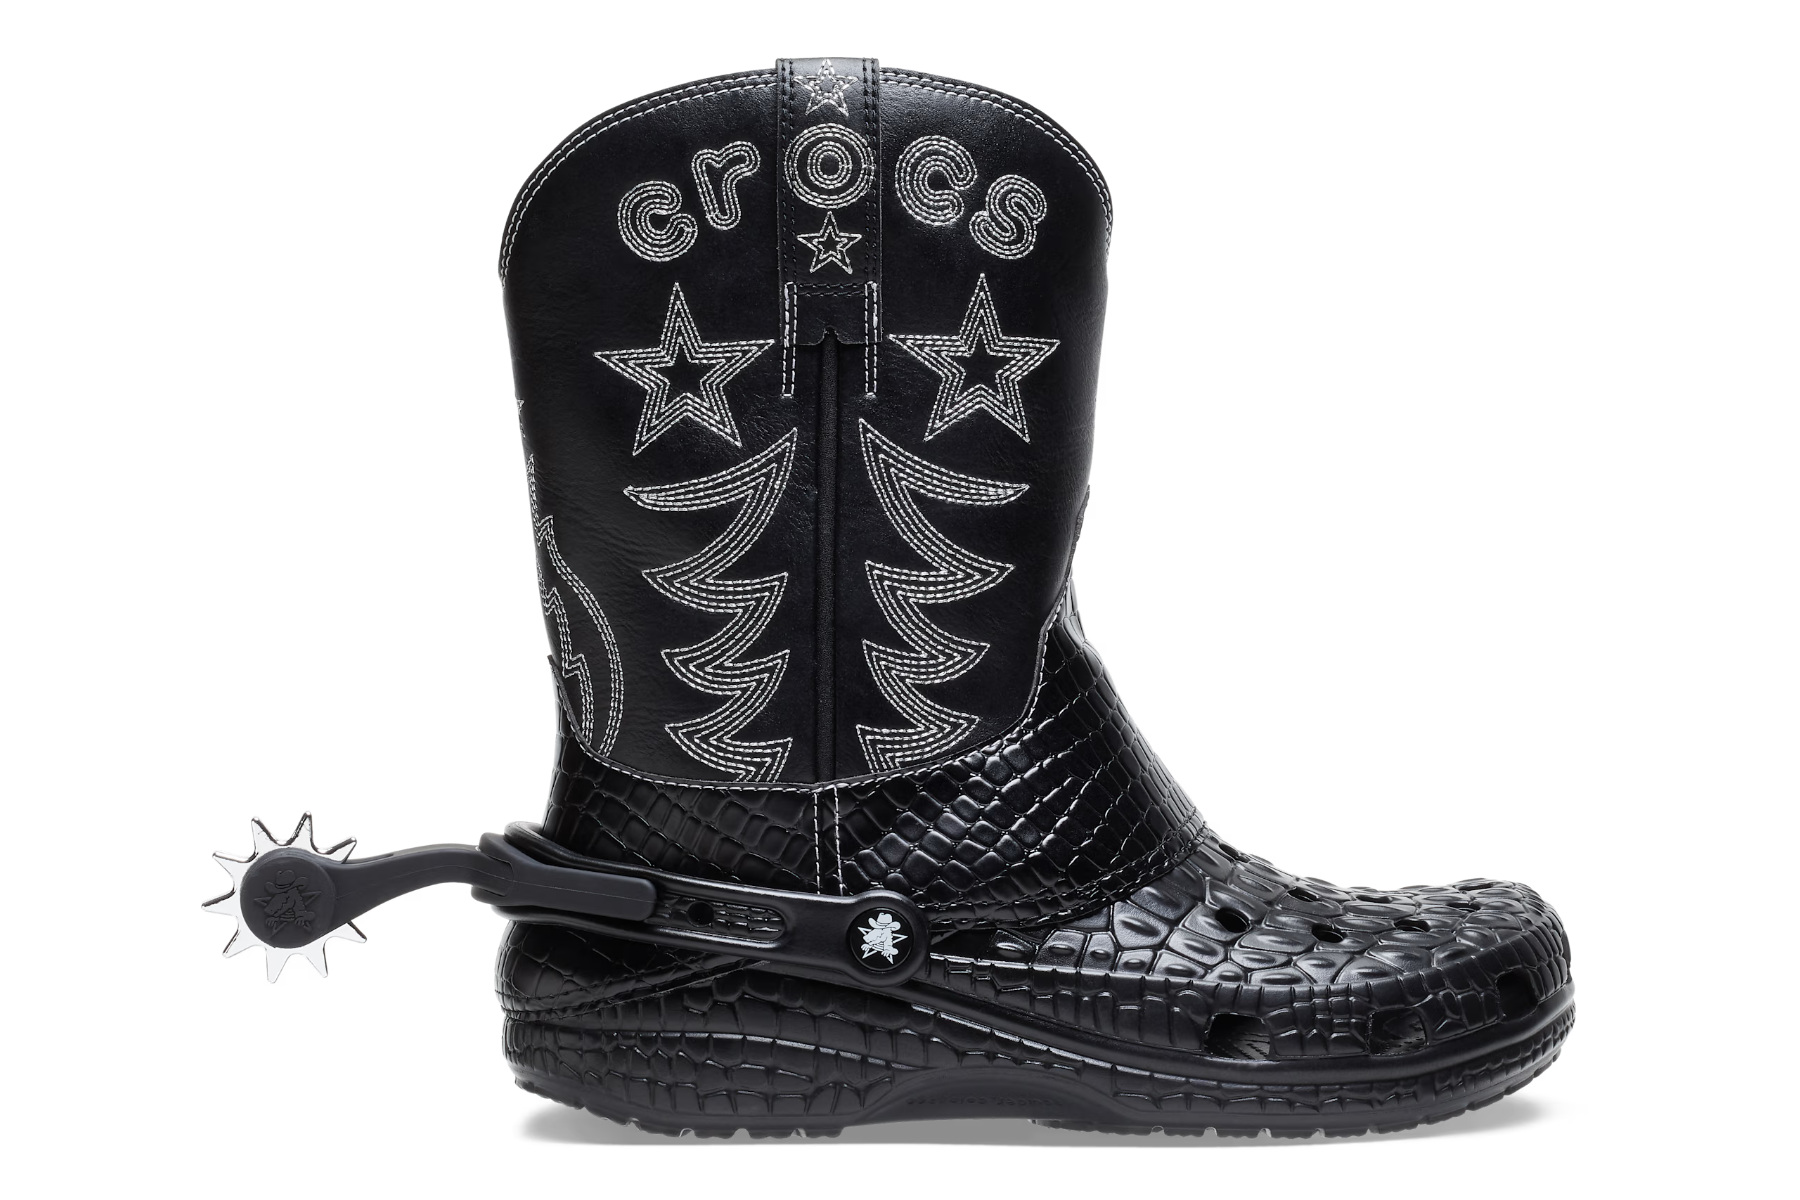 Crocs’ New Cowboy Boots Are For Ridin' Dirty!